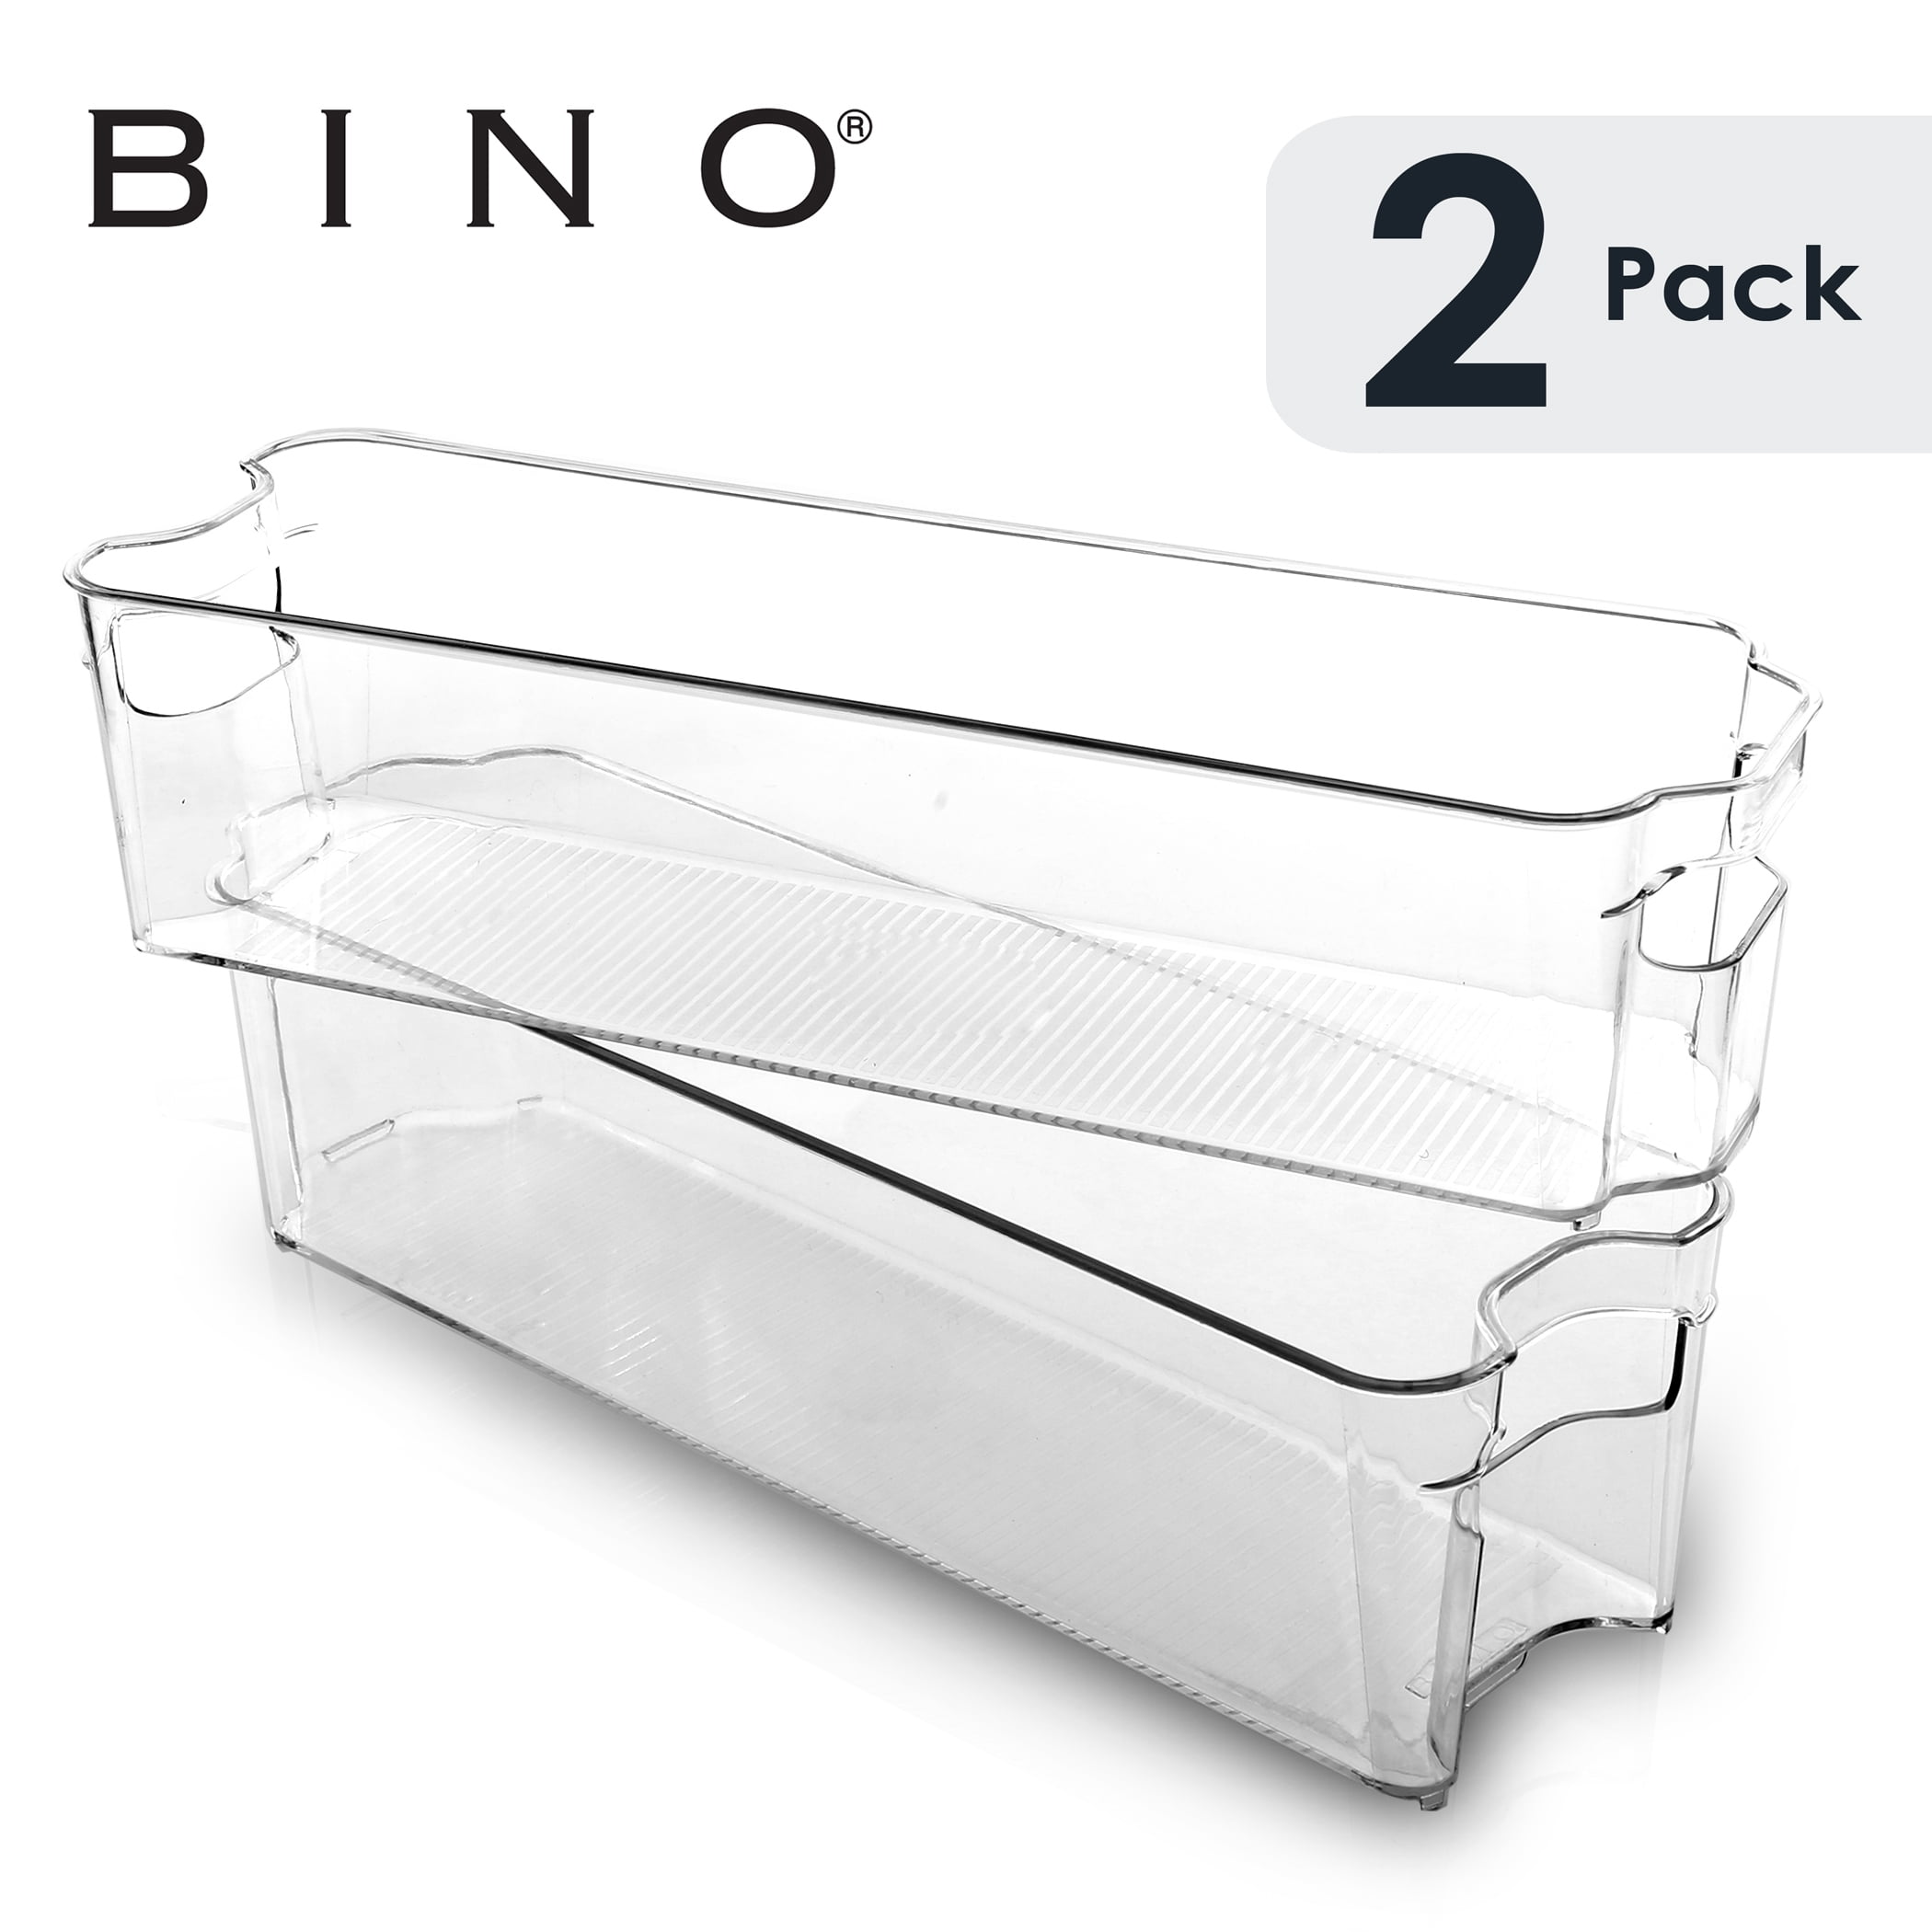 Photo 1 of BINO Stackable Plastic Organizer Storage Bins, Small - 2 Pack - Plastic Storage Organizer for Home, Office, Bath, Bedroom, and Kitchen - Refrigerator, Freezer and Pantry Cabinet Storage